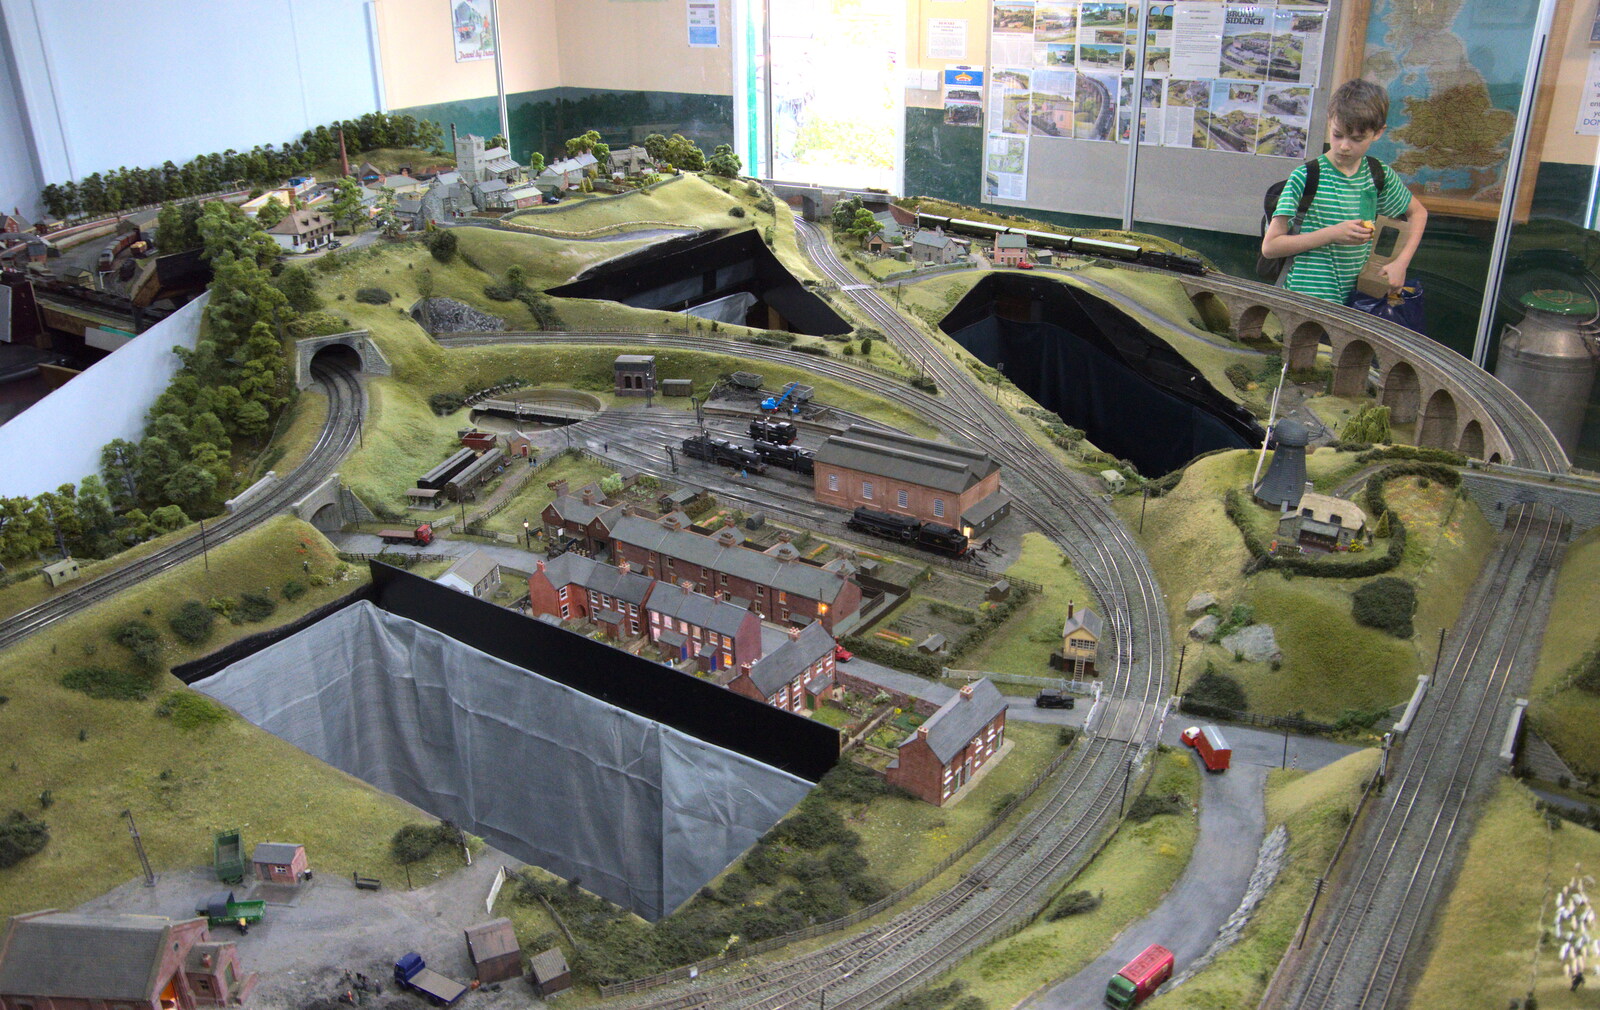 Harry scopes out an impressive model railway from A Coronation Camping Picnic, Kelling Heath, Norfolk - 6th May 2023